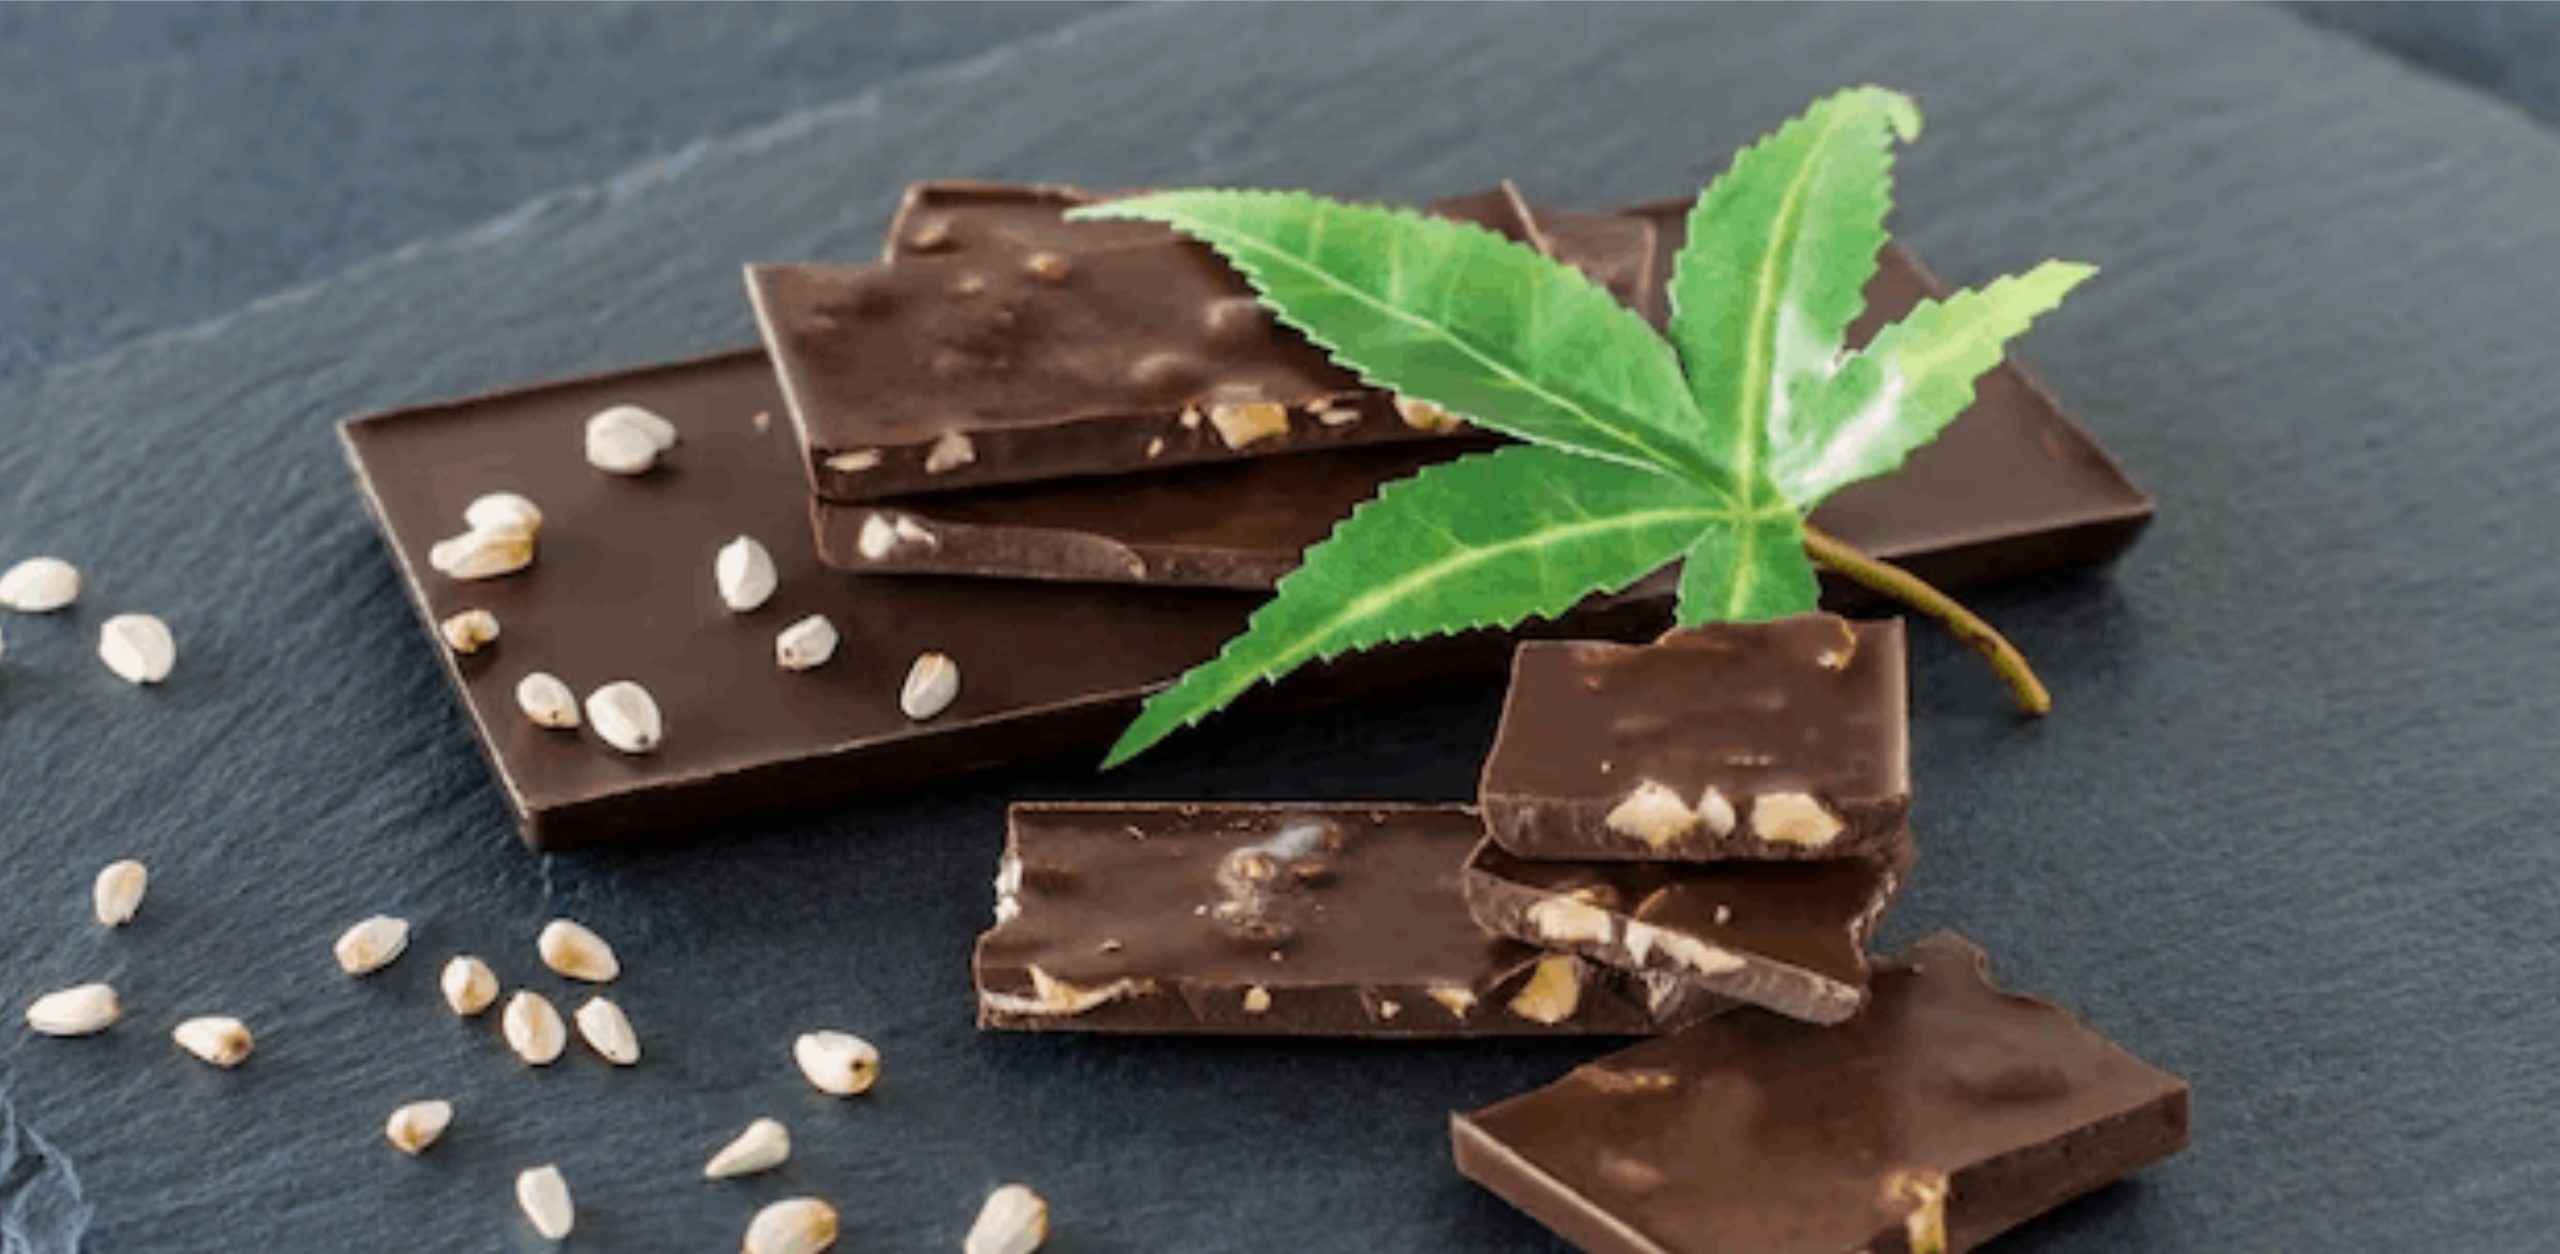 When choosing weed chocolate bars, it is important to find a reputable supplier that uses high-quality ingredients.